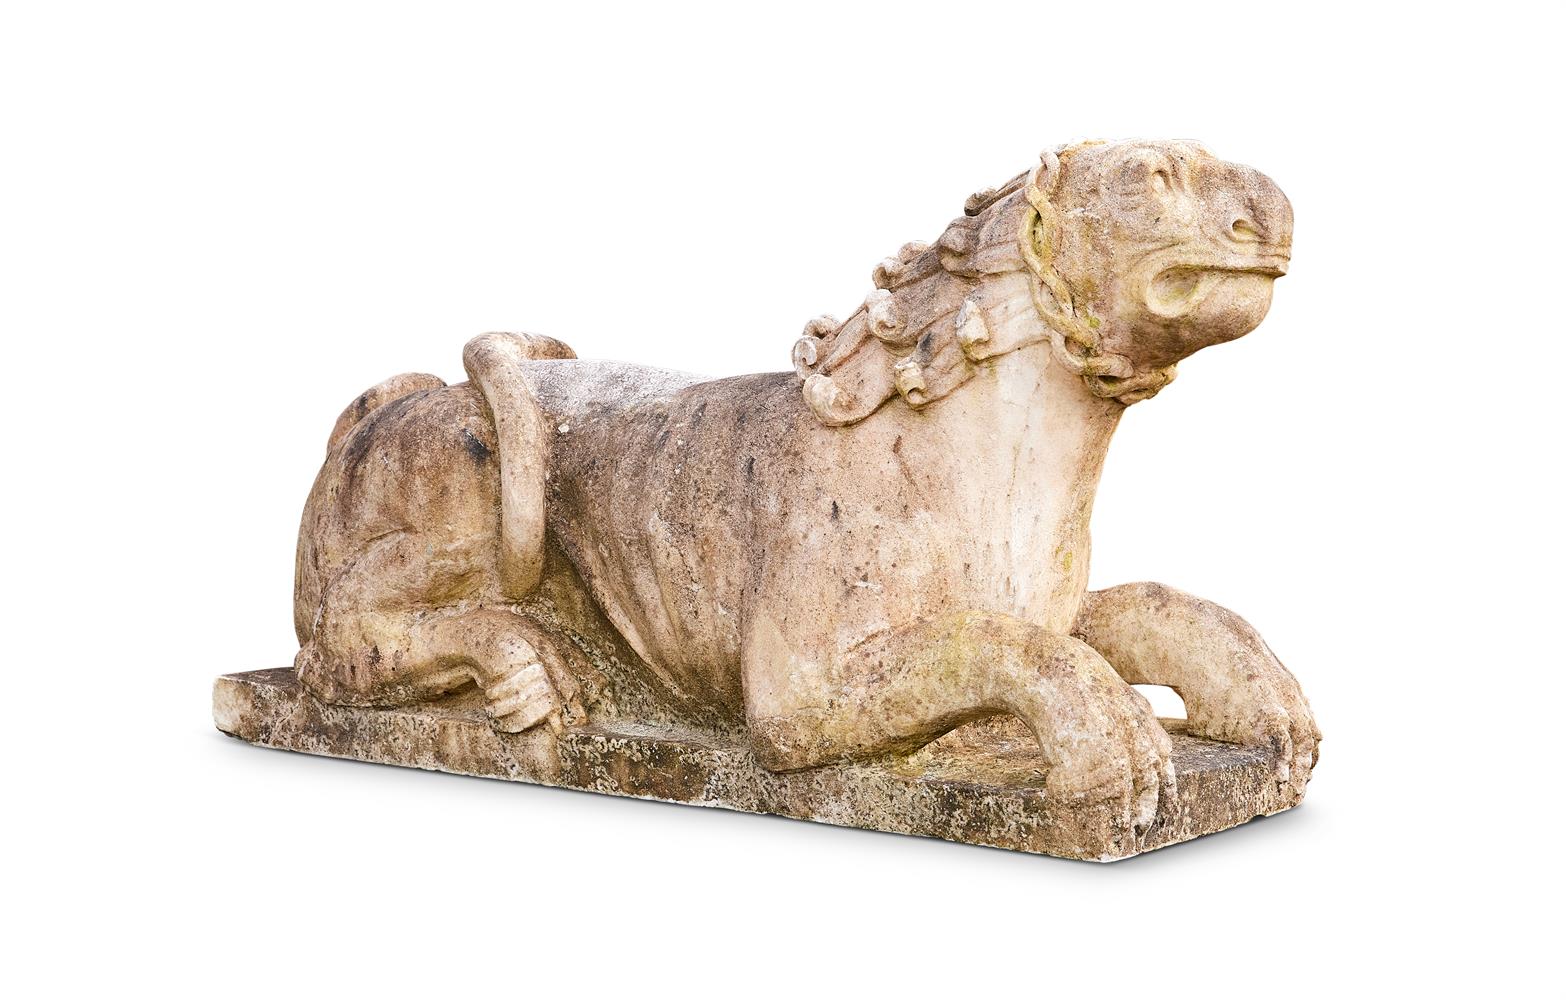 A PAIR OF ITALIAN WHITE MARBLE LIONS IN THE RENAISSANCE STYLE, 18TH CENTURY - Image 3 of 3